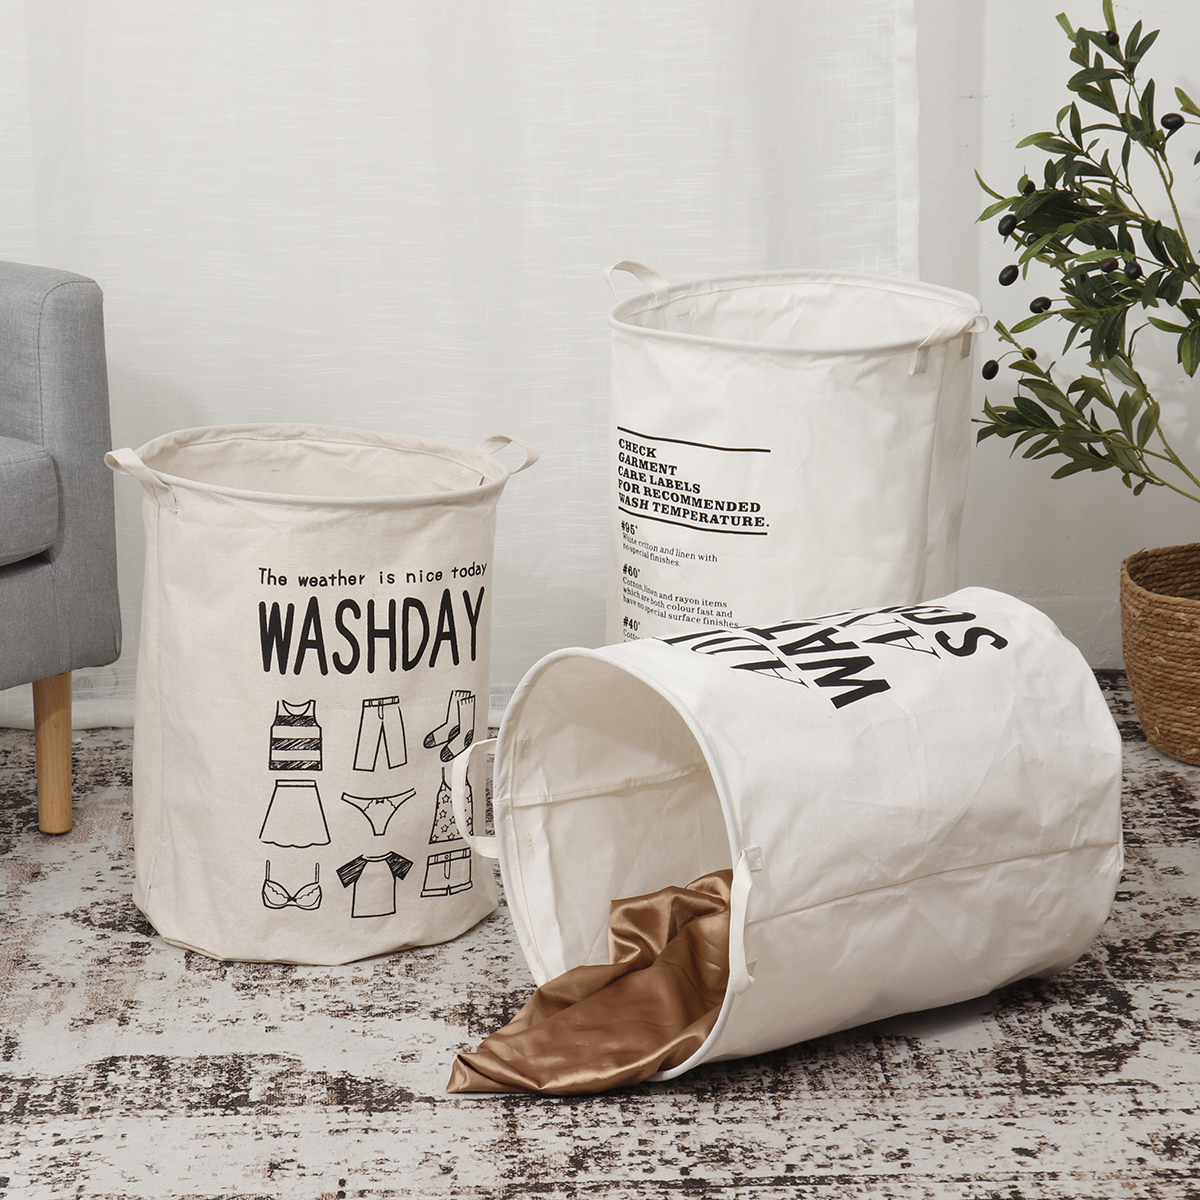 Foldable-Laundry-Basket-Round-Cotton-Linen-Collapsible-Washing-Hamper-Waterproof-Dirty-Clothes-Stora-1908165-5